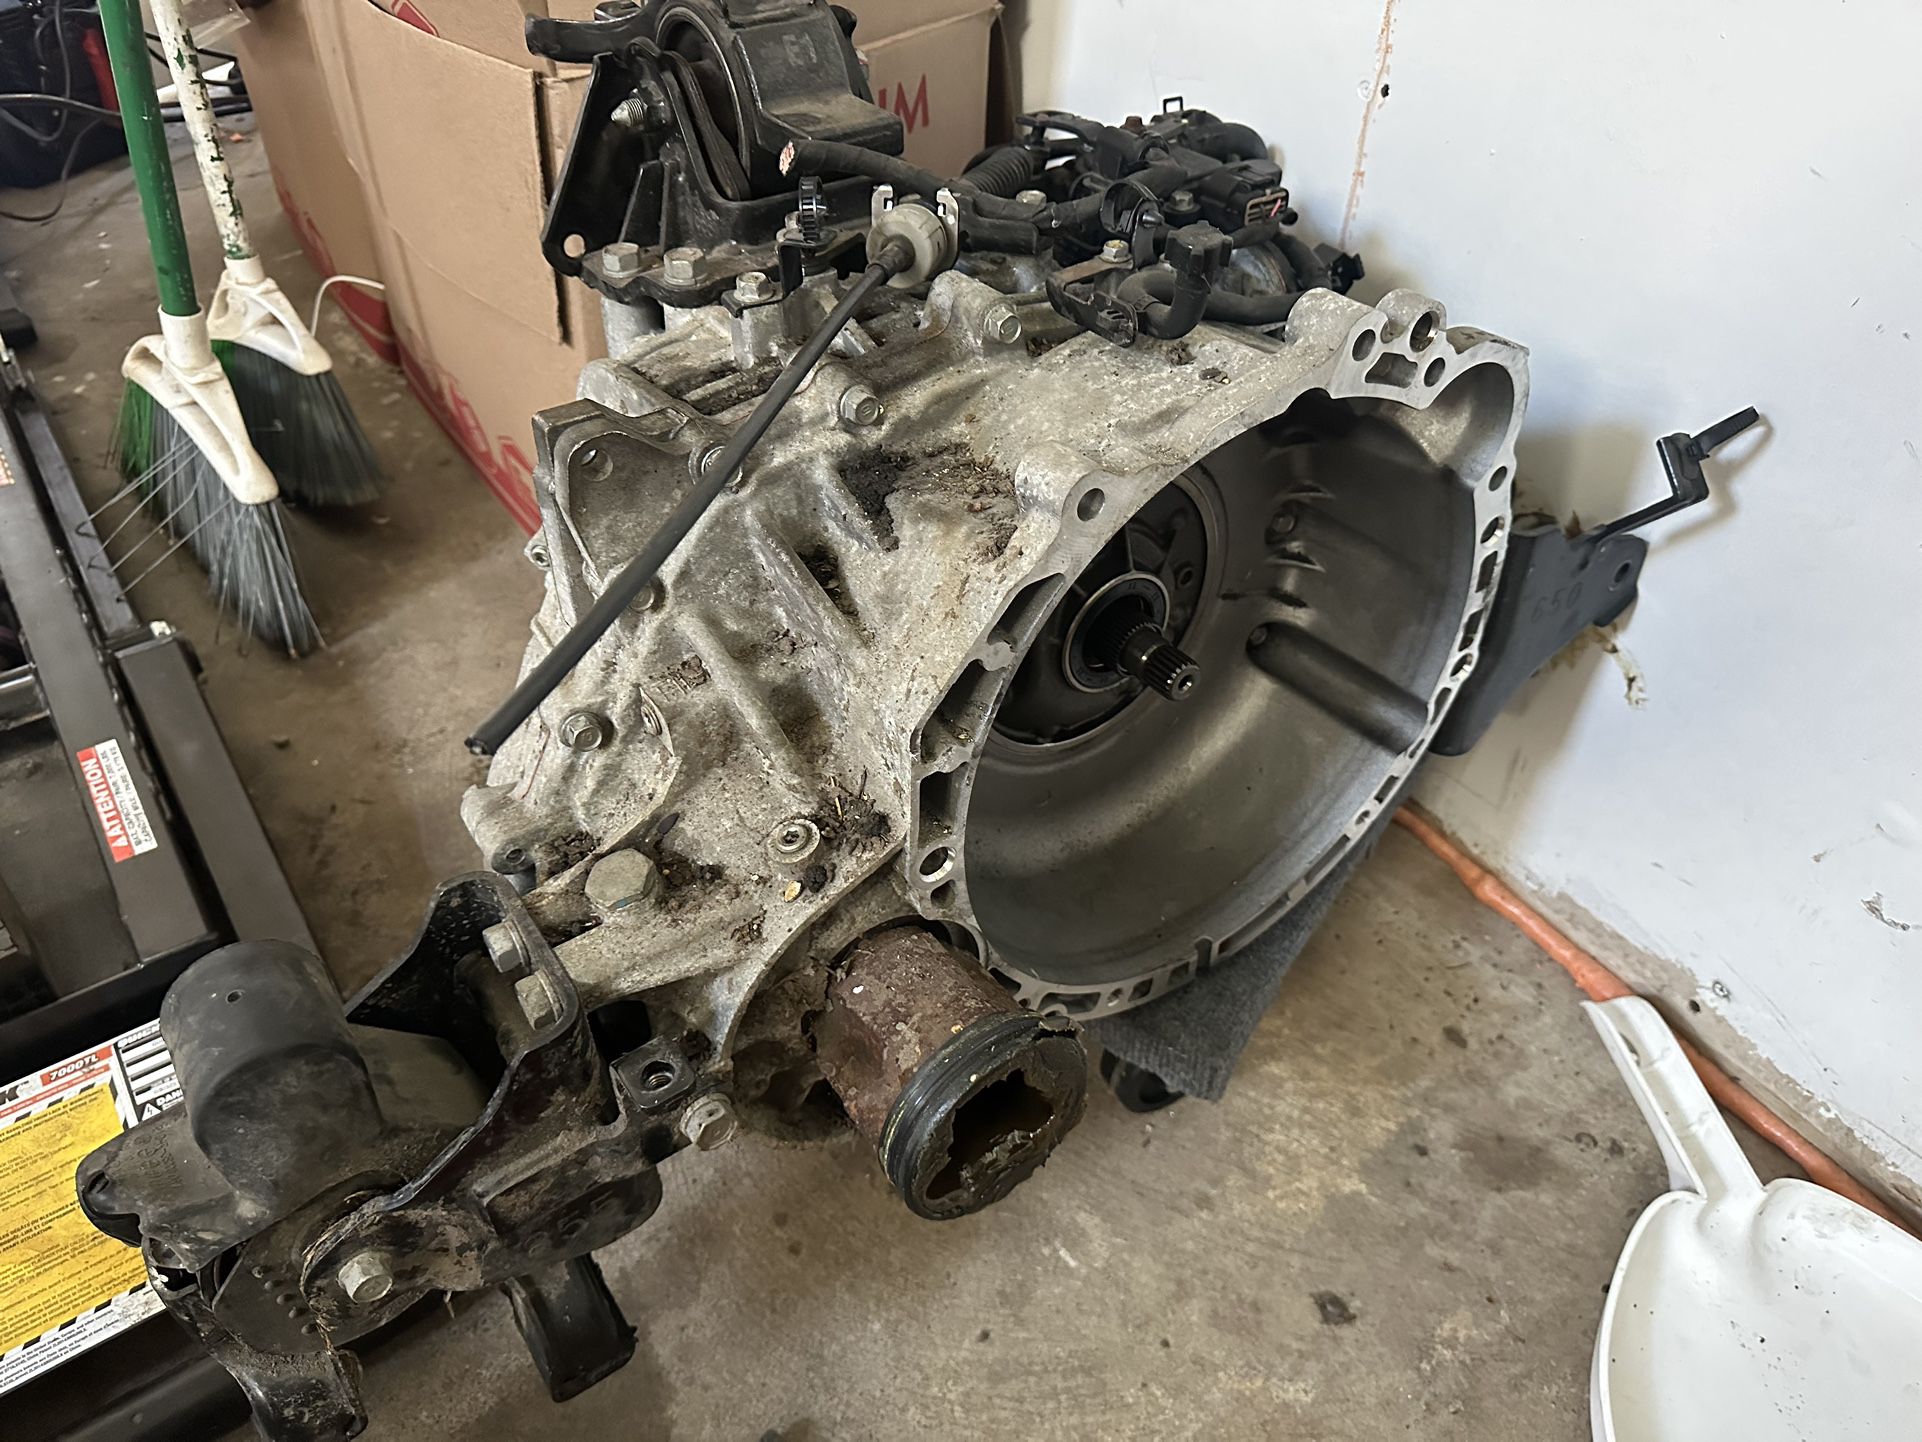 Selling transmission for Hyundai Sonata 2012 with 60k  mileage on it. Body 2011-2015  